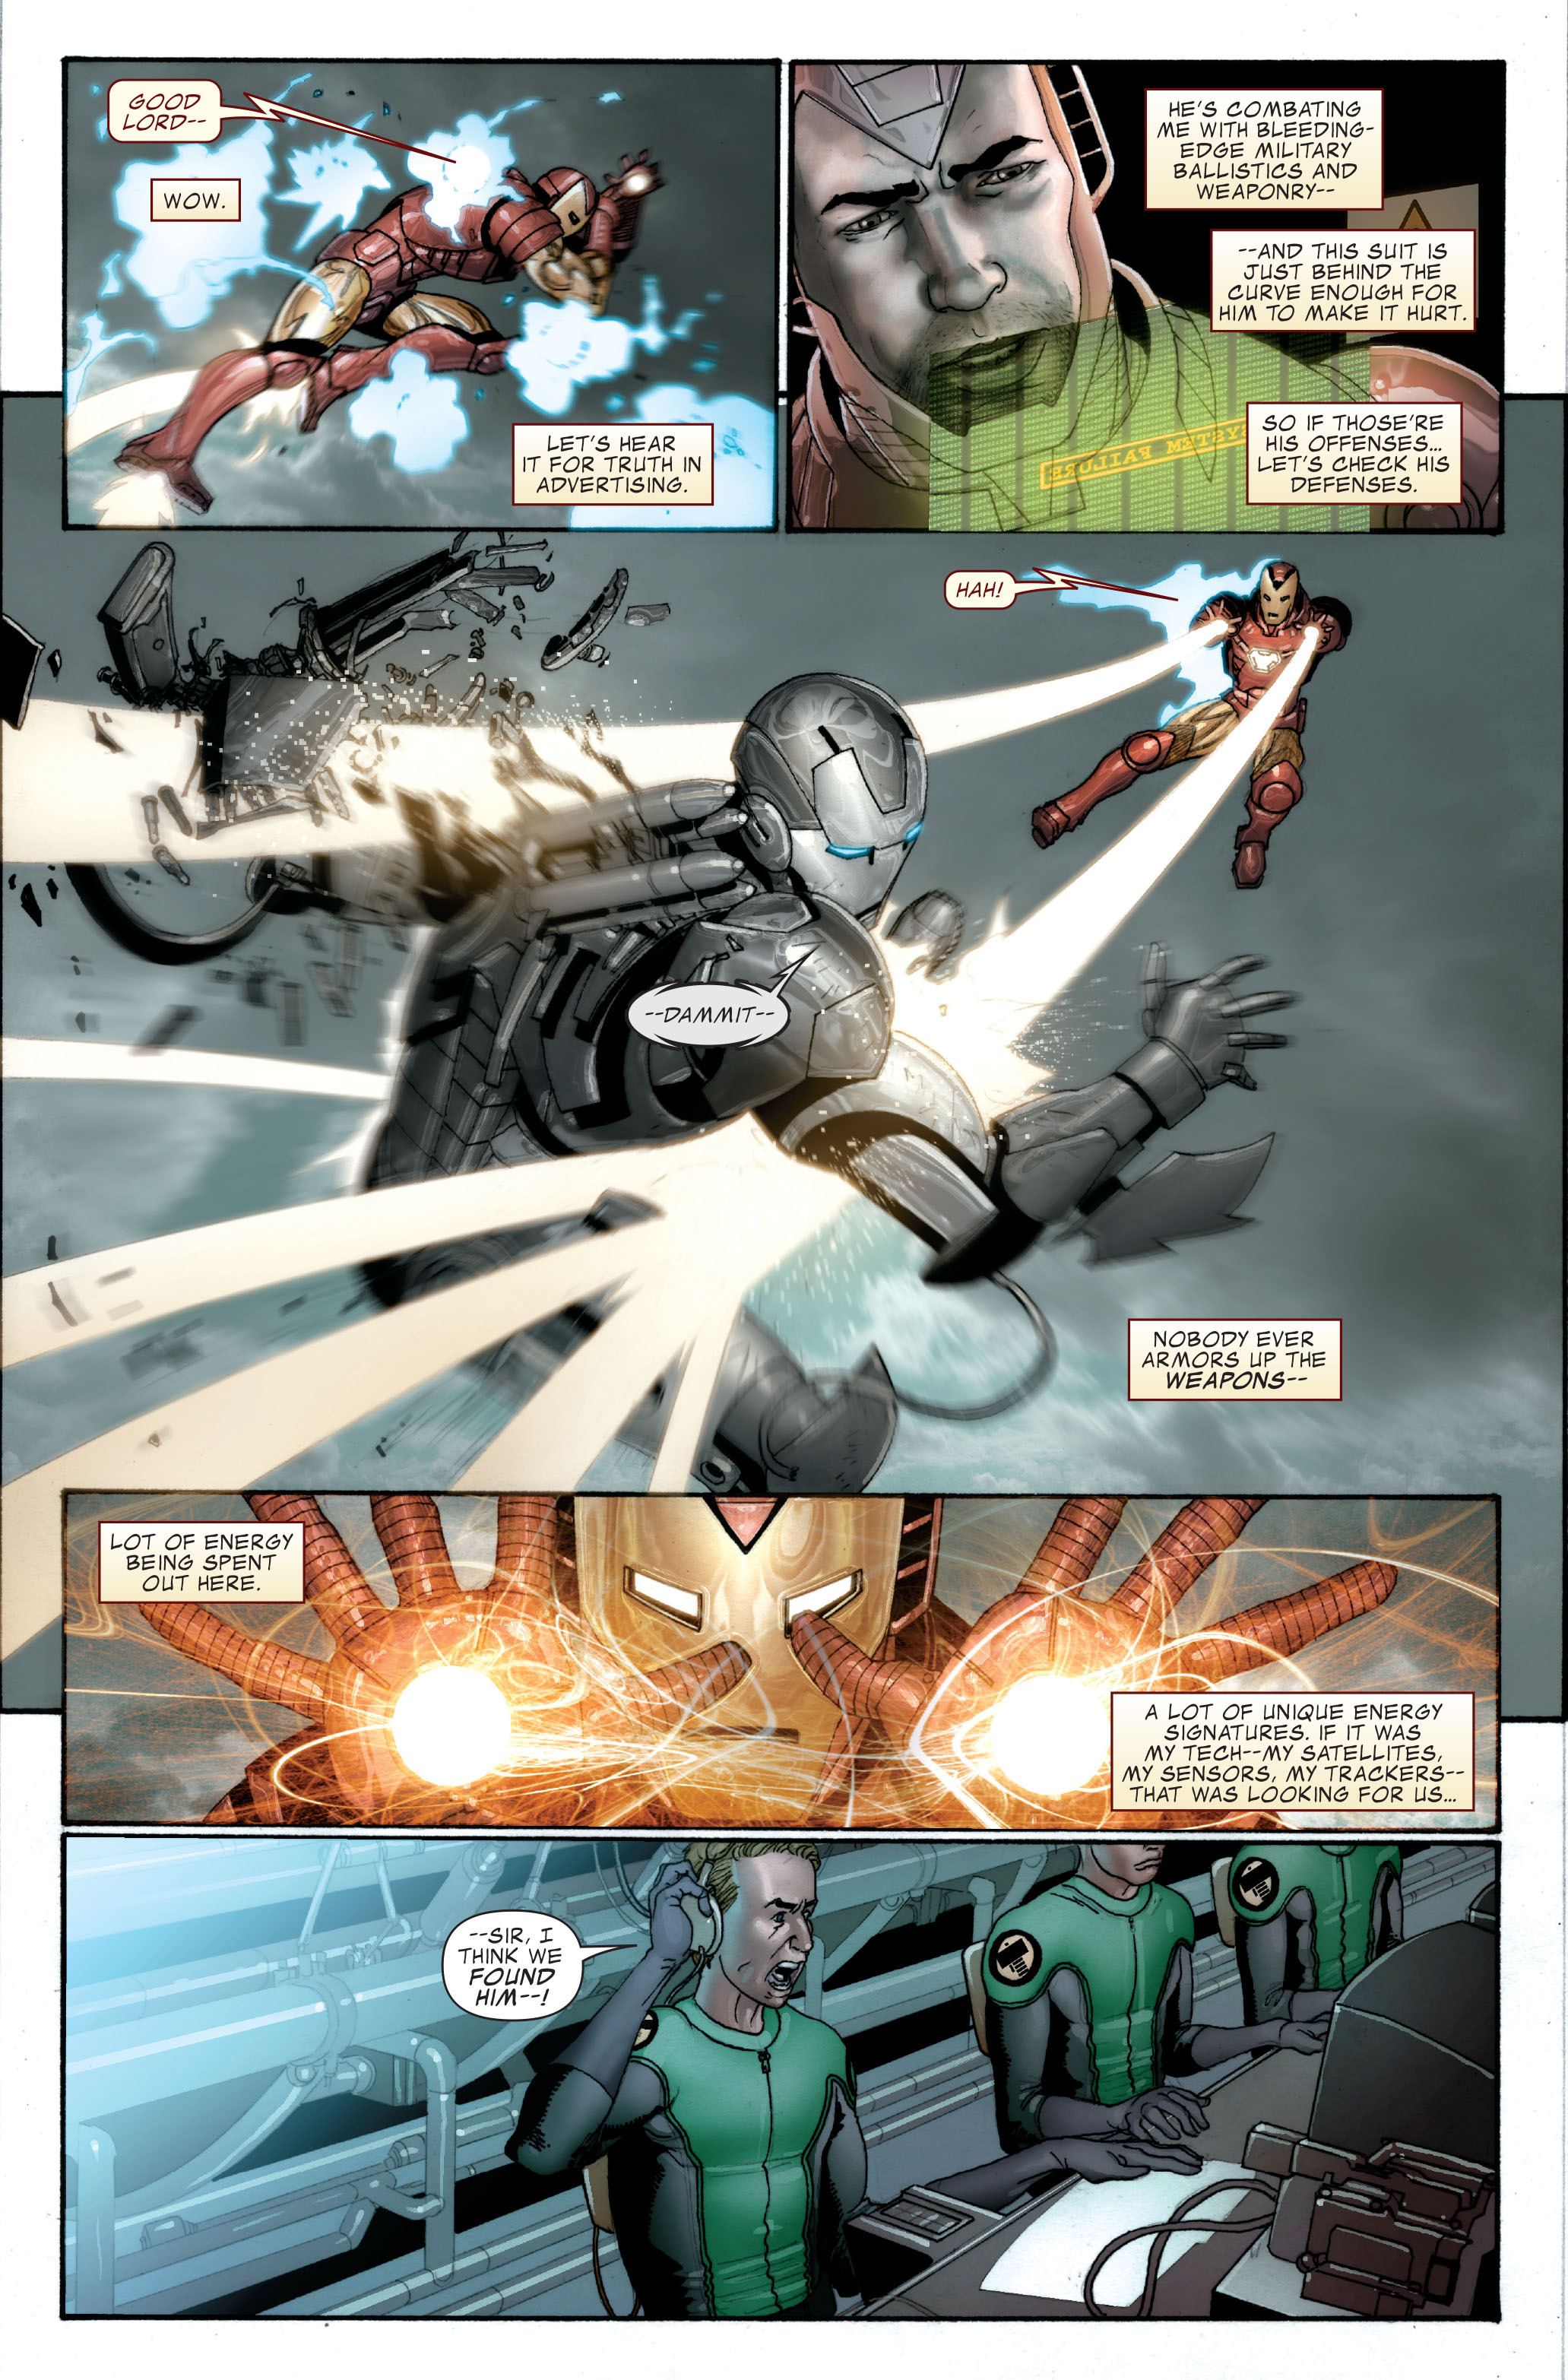 Invincible Iron Man (2008) 11 Page 14